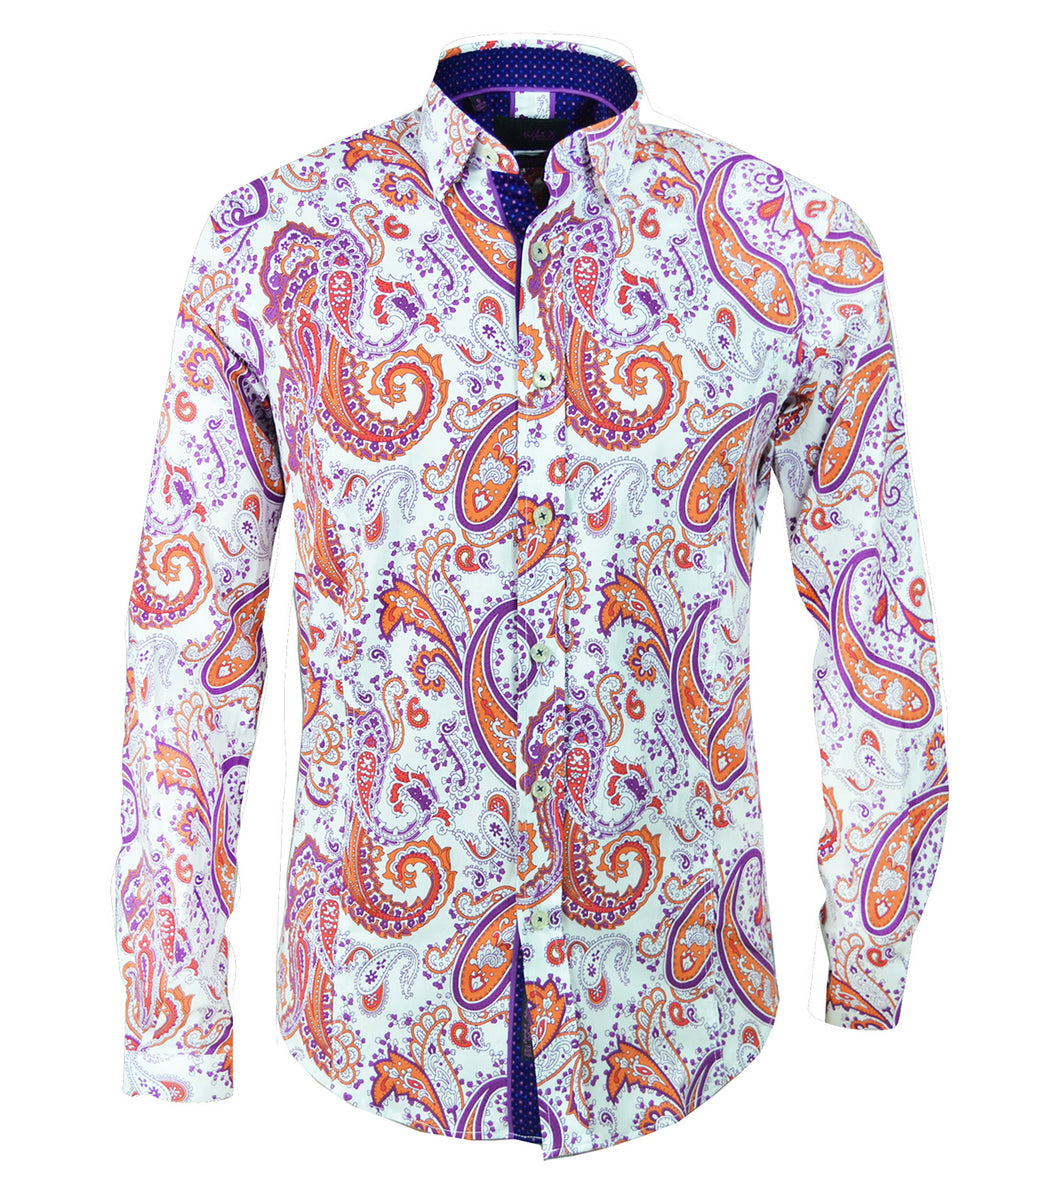 Slim Fit Paisley Cotton Shirt in Purple, Blue and Orange | Paul Malone